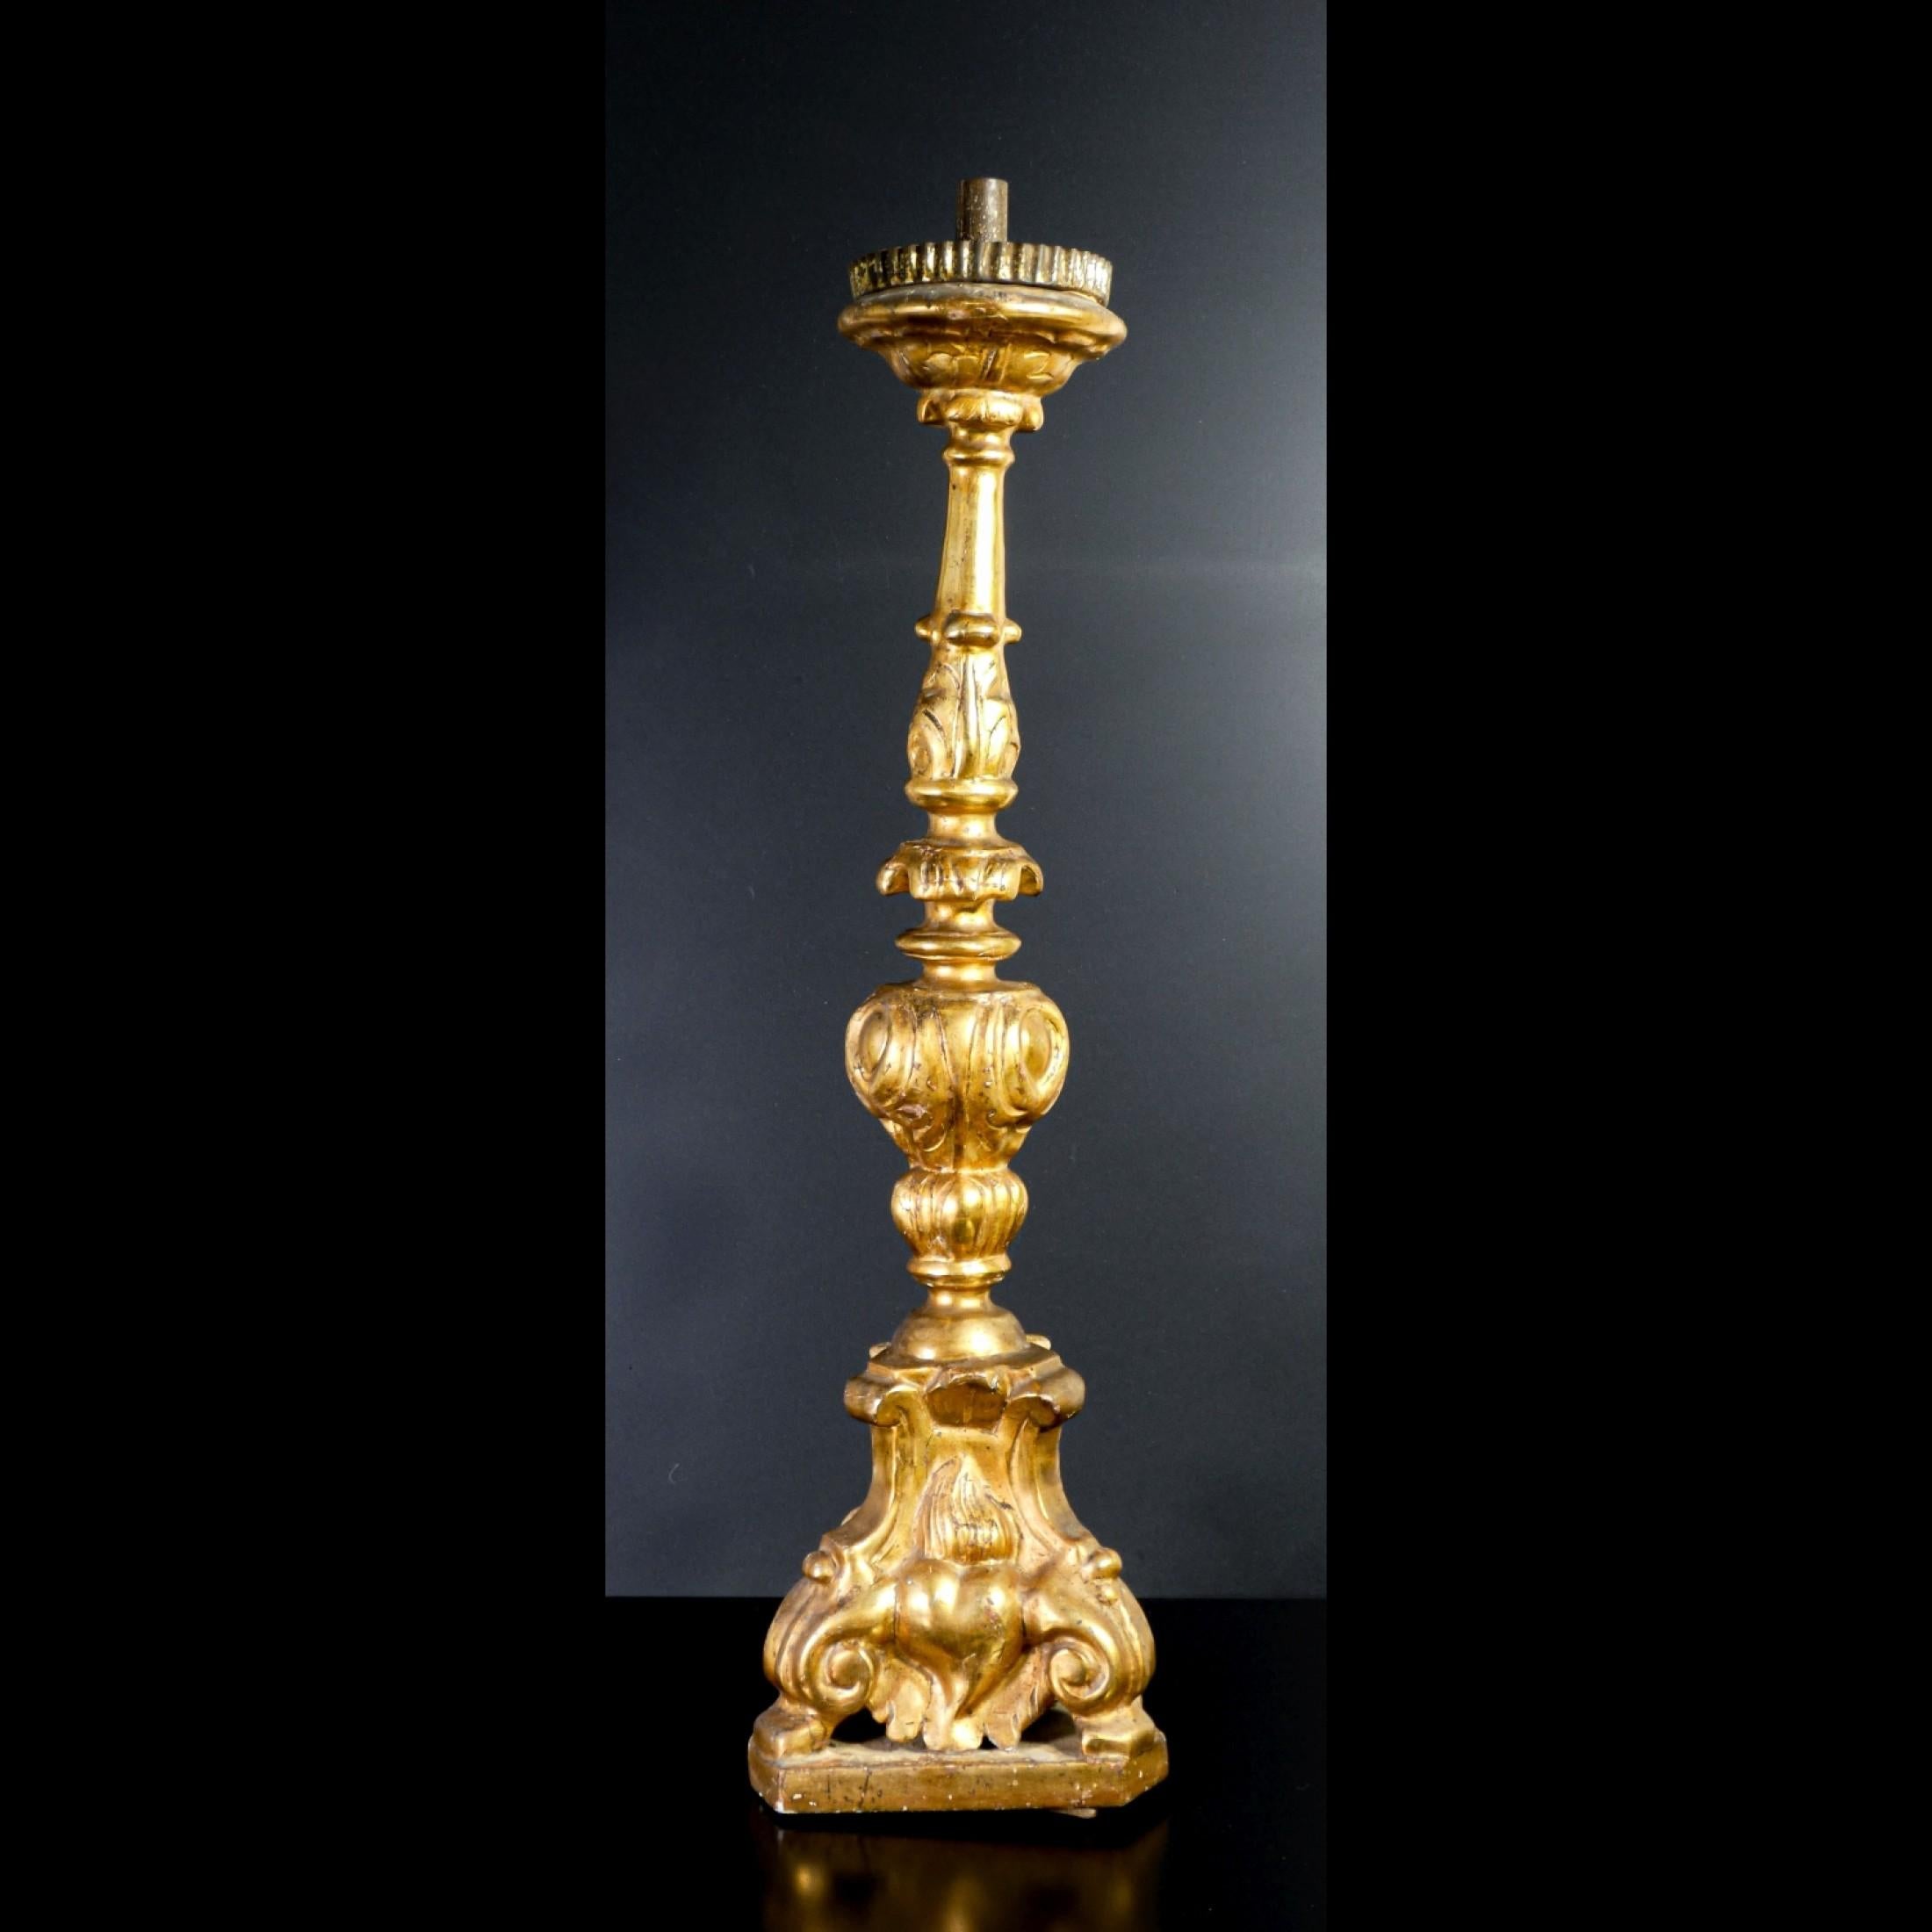 Original Louis XV candlestick, in carved wood, 'mecca' gilded.

ORIGIN
Italy

PERIOD
1730-1740

MODEL
Side candlestick

MATERIALS
Carved wood, 'mecca' gilding.

DIMENSIONS
H 69 cm

CONDITIONS
The candlestick is in very good